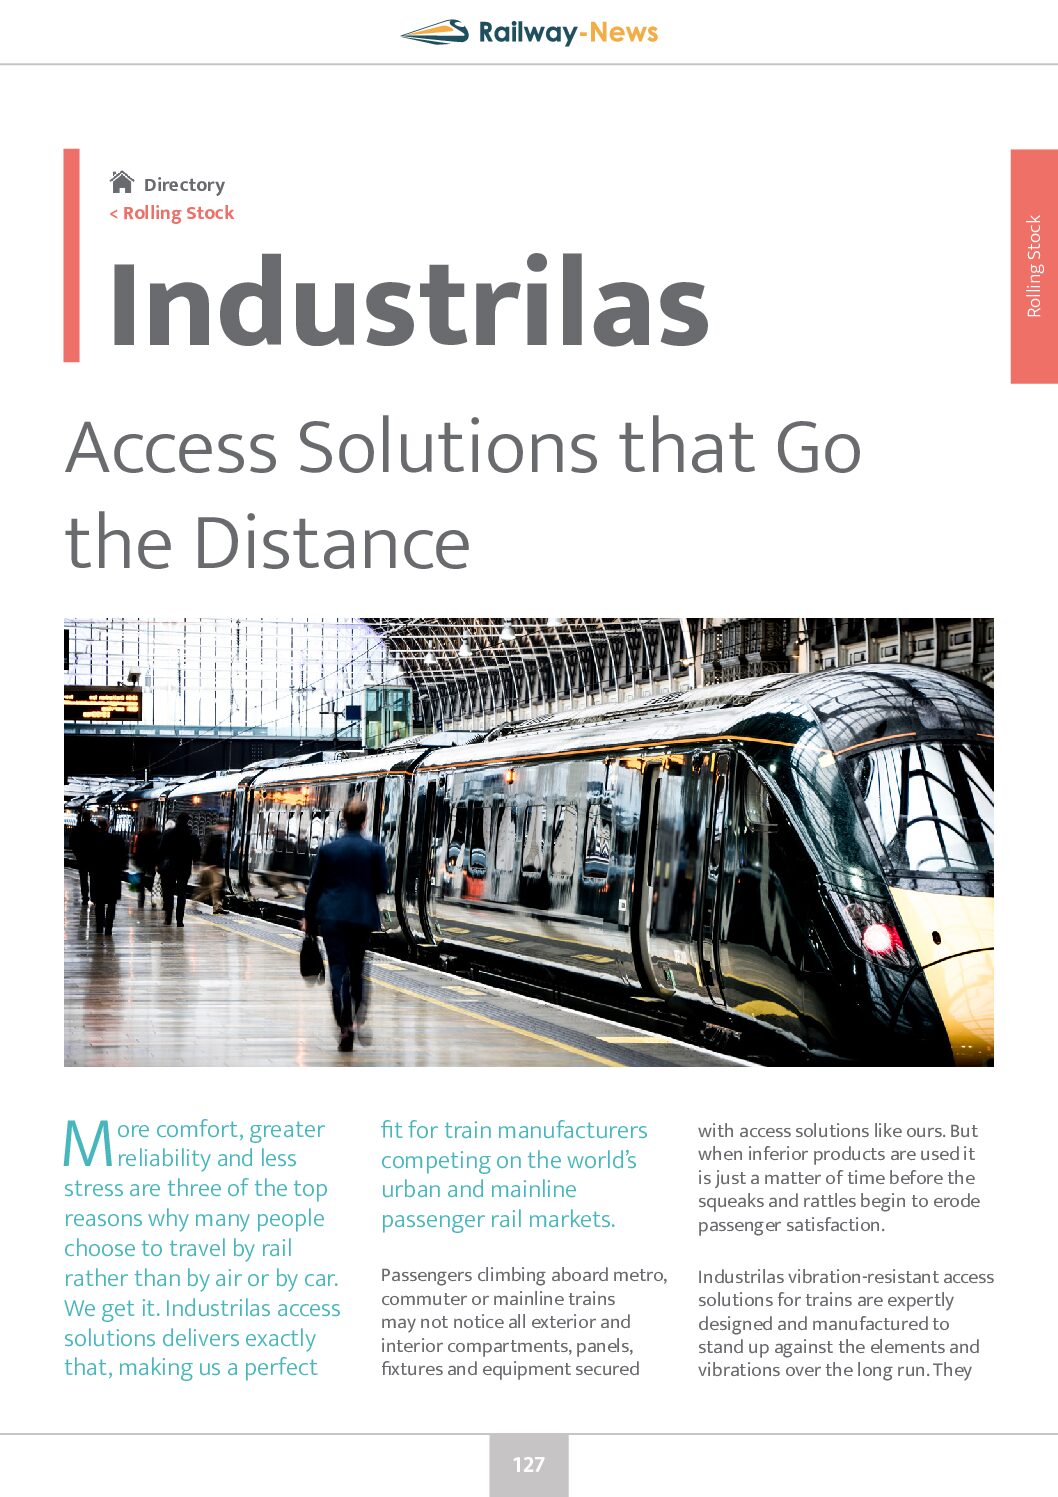 Access Solutions that Go the Distance